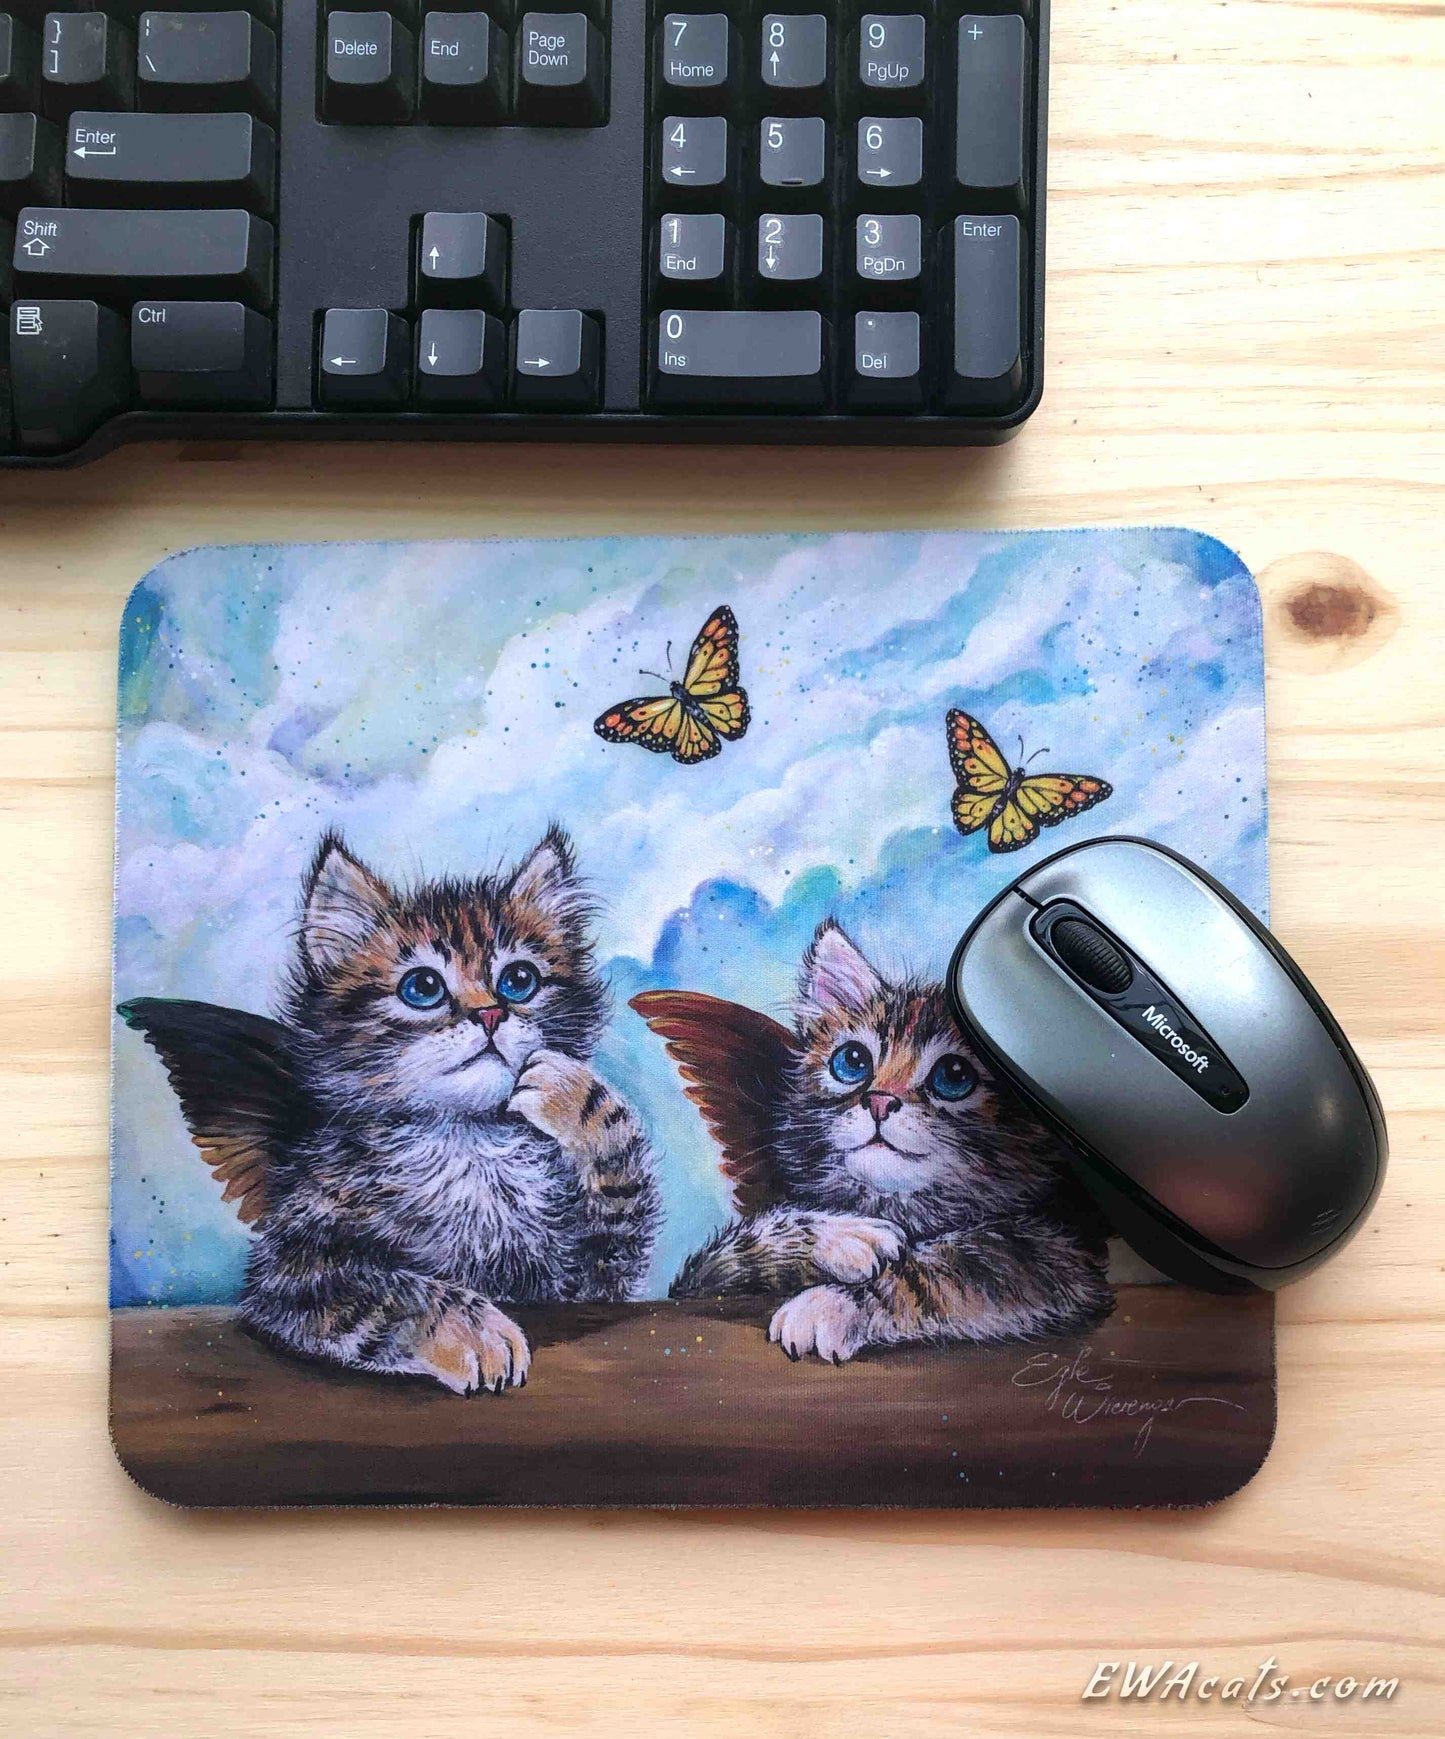 Mouse Pad "The Sistine Kittens"